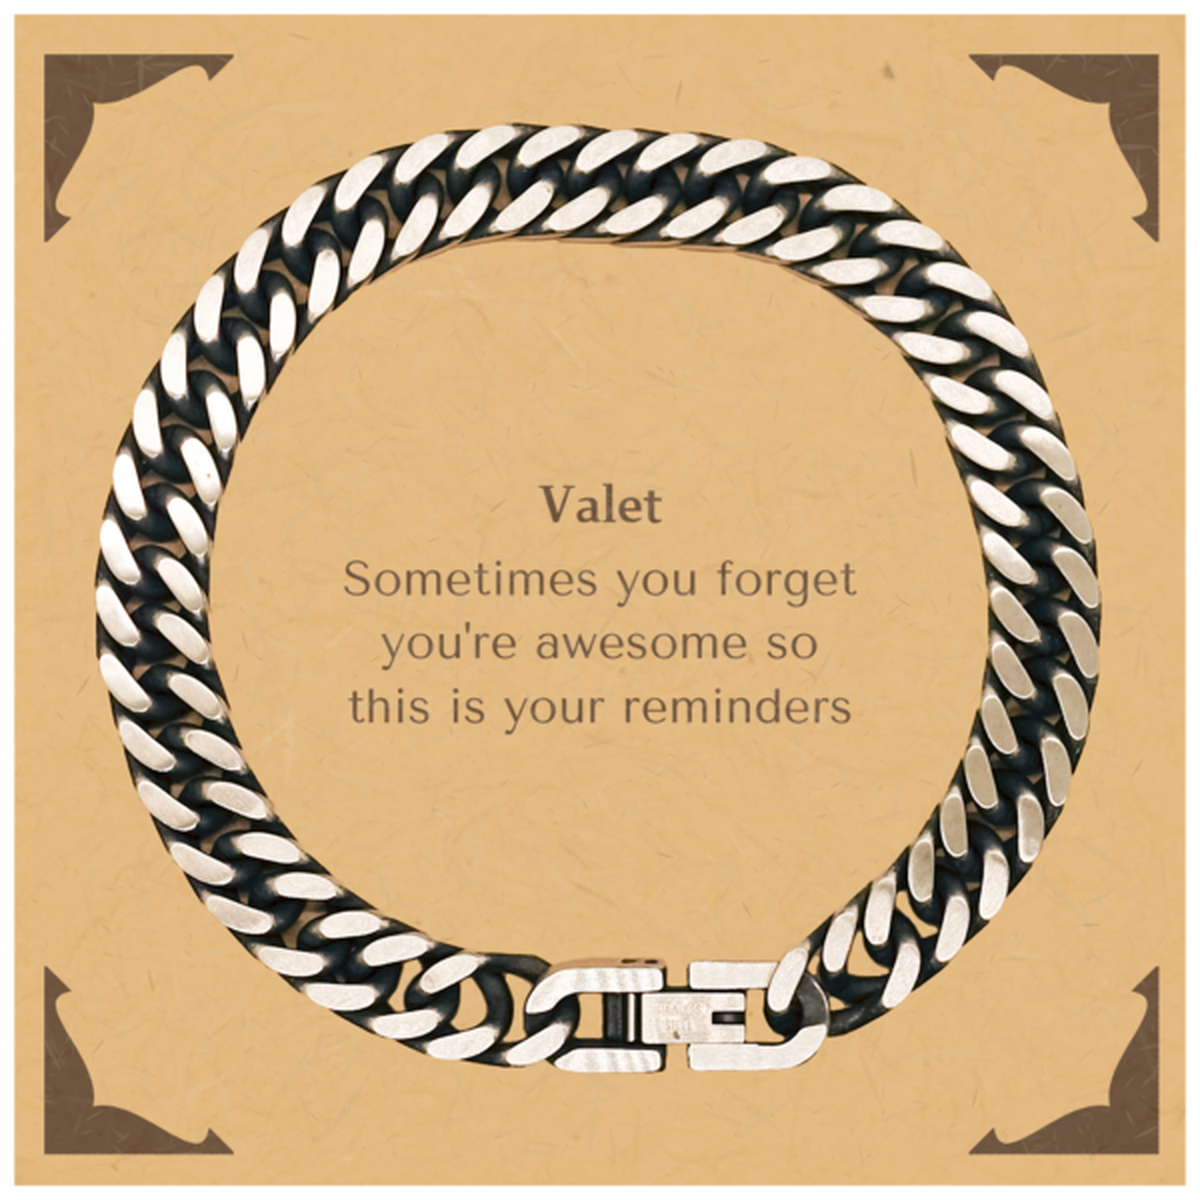 Sentimental Valet Cuban Link Chain Bracelet, Valet Sometimes you forget you're awesome so this is your reminders, Graduation Christmas Birthday Gifts for Valet, Men, Women, Coworkers